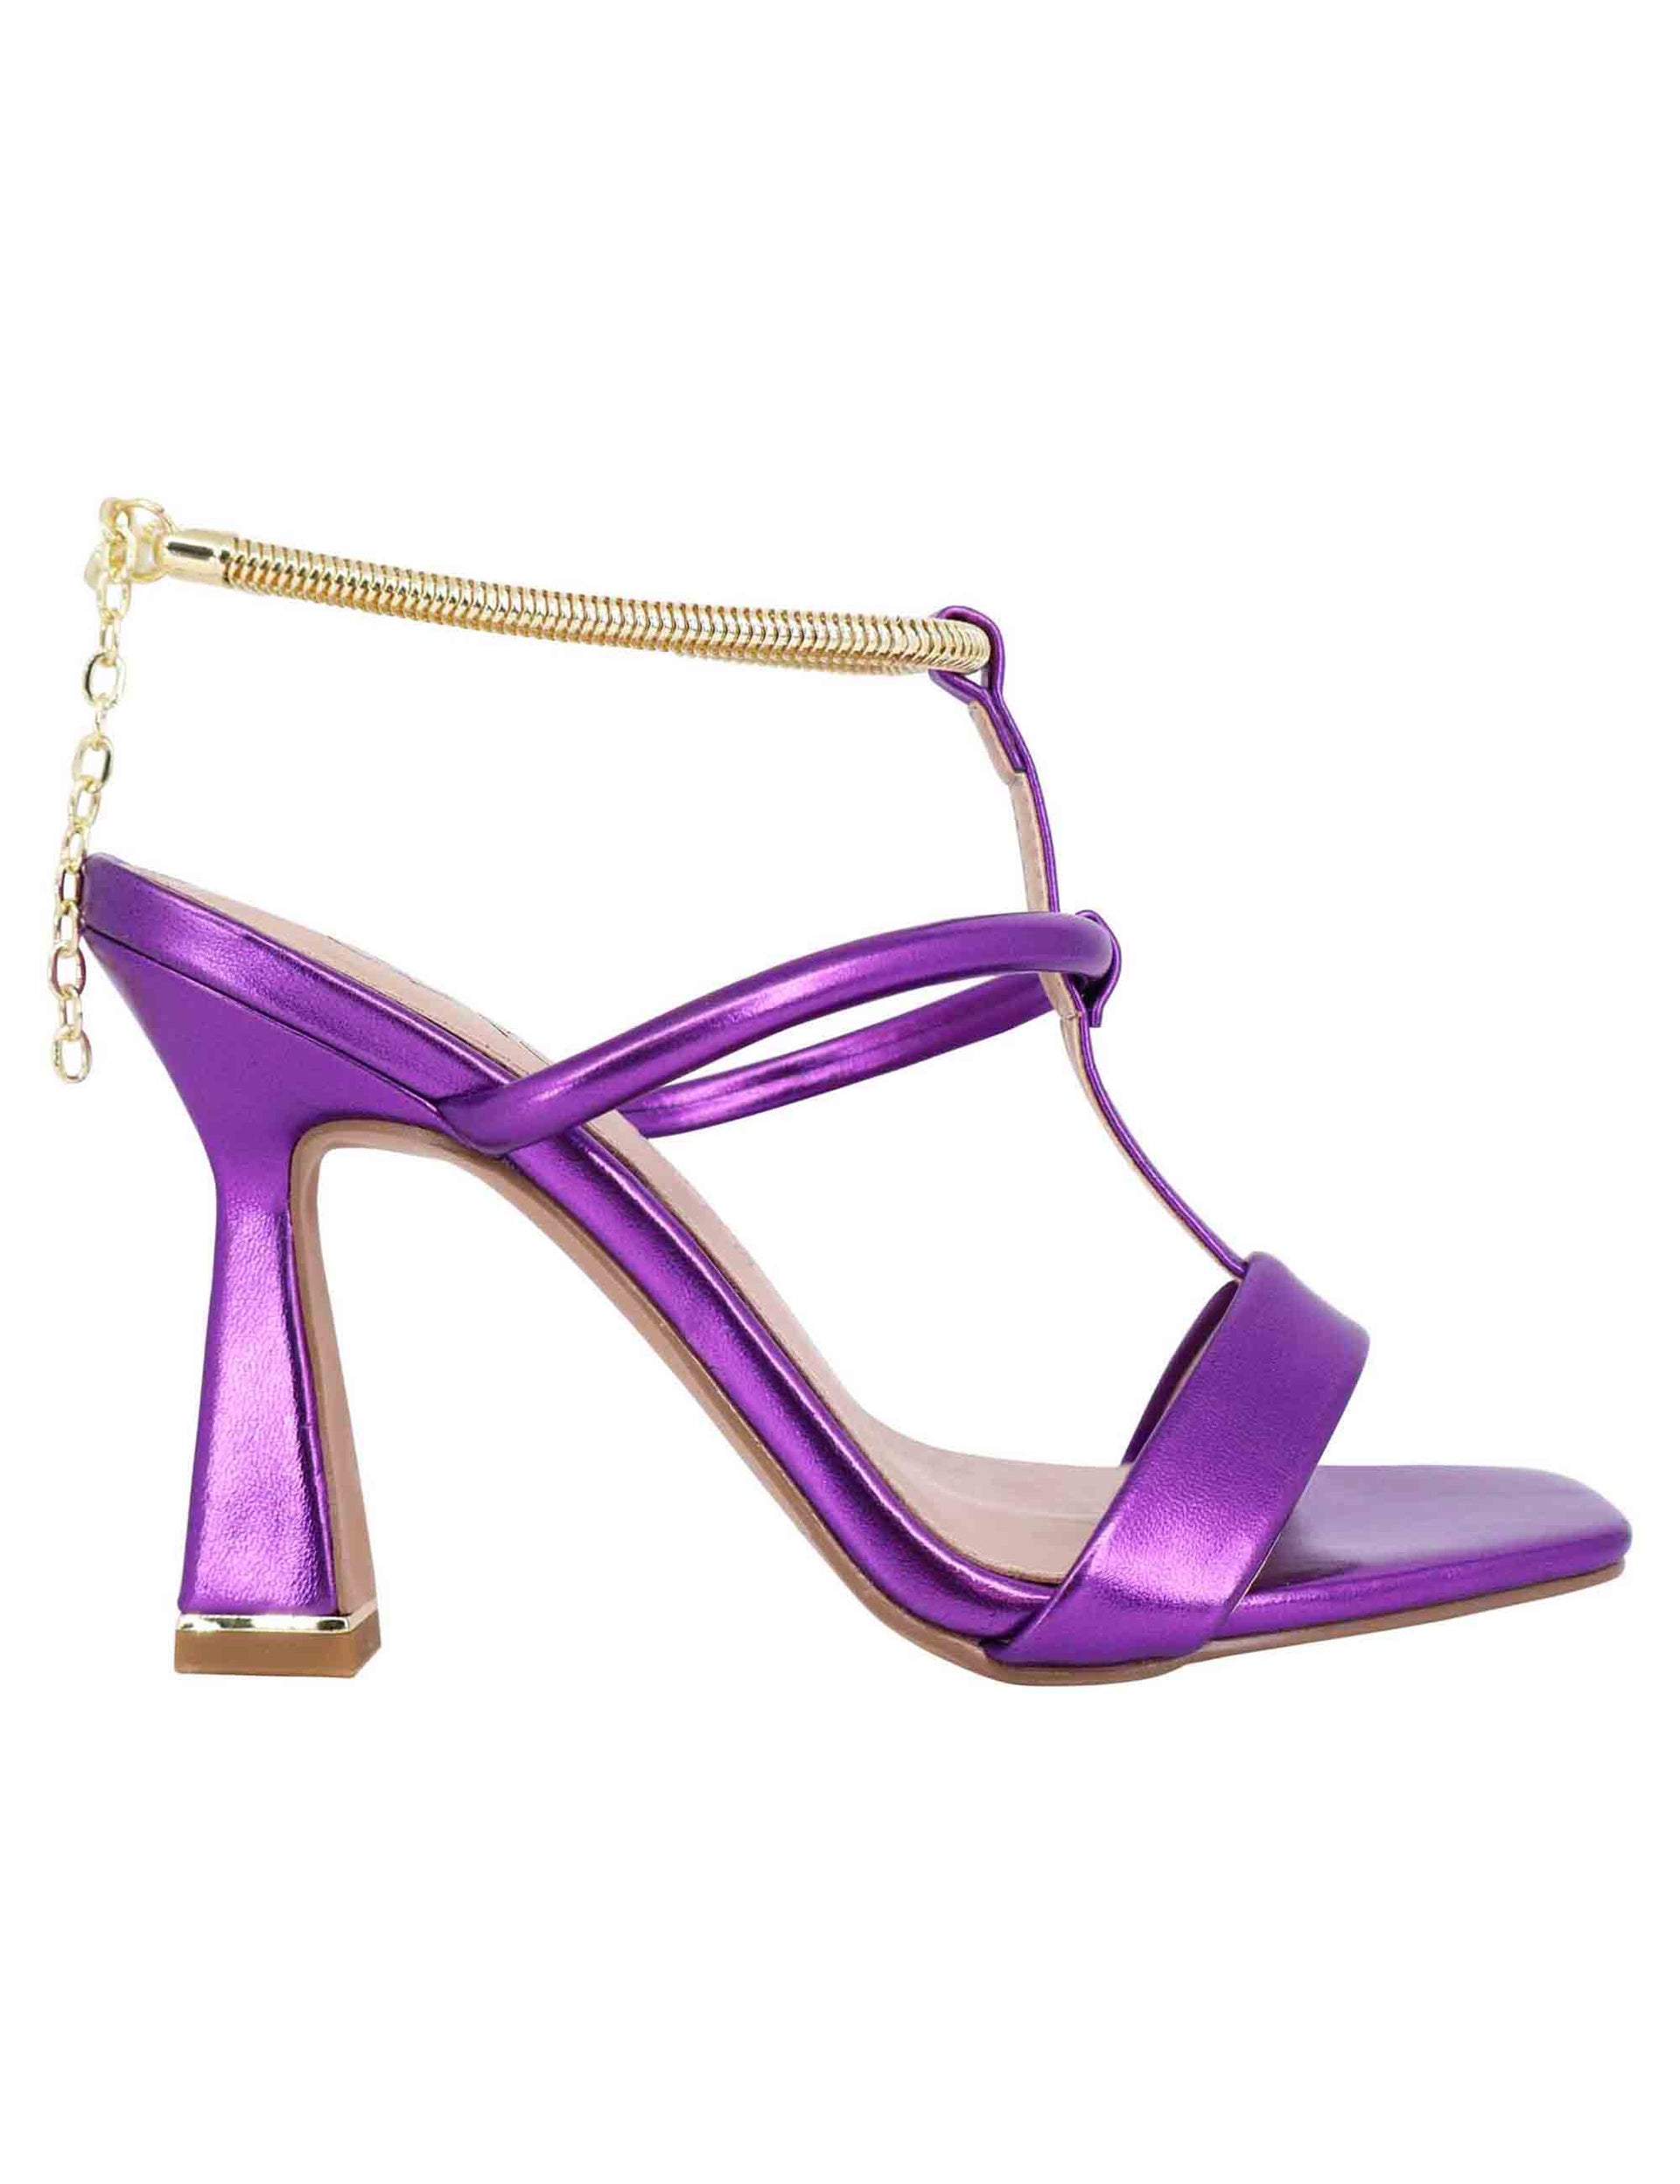 Women's sandals in purple eco leather with high heel and soft gold anklet